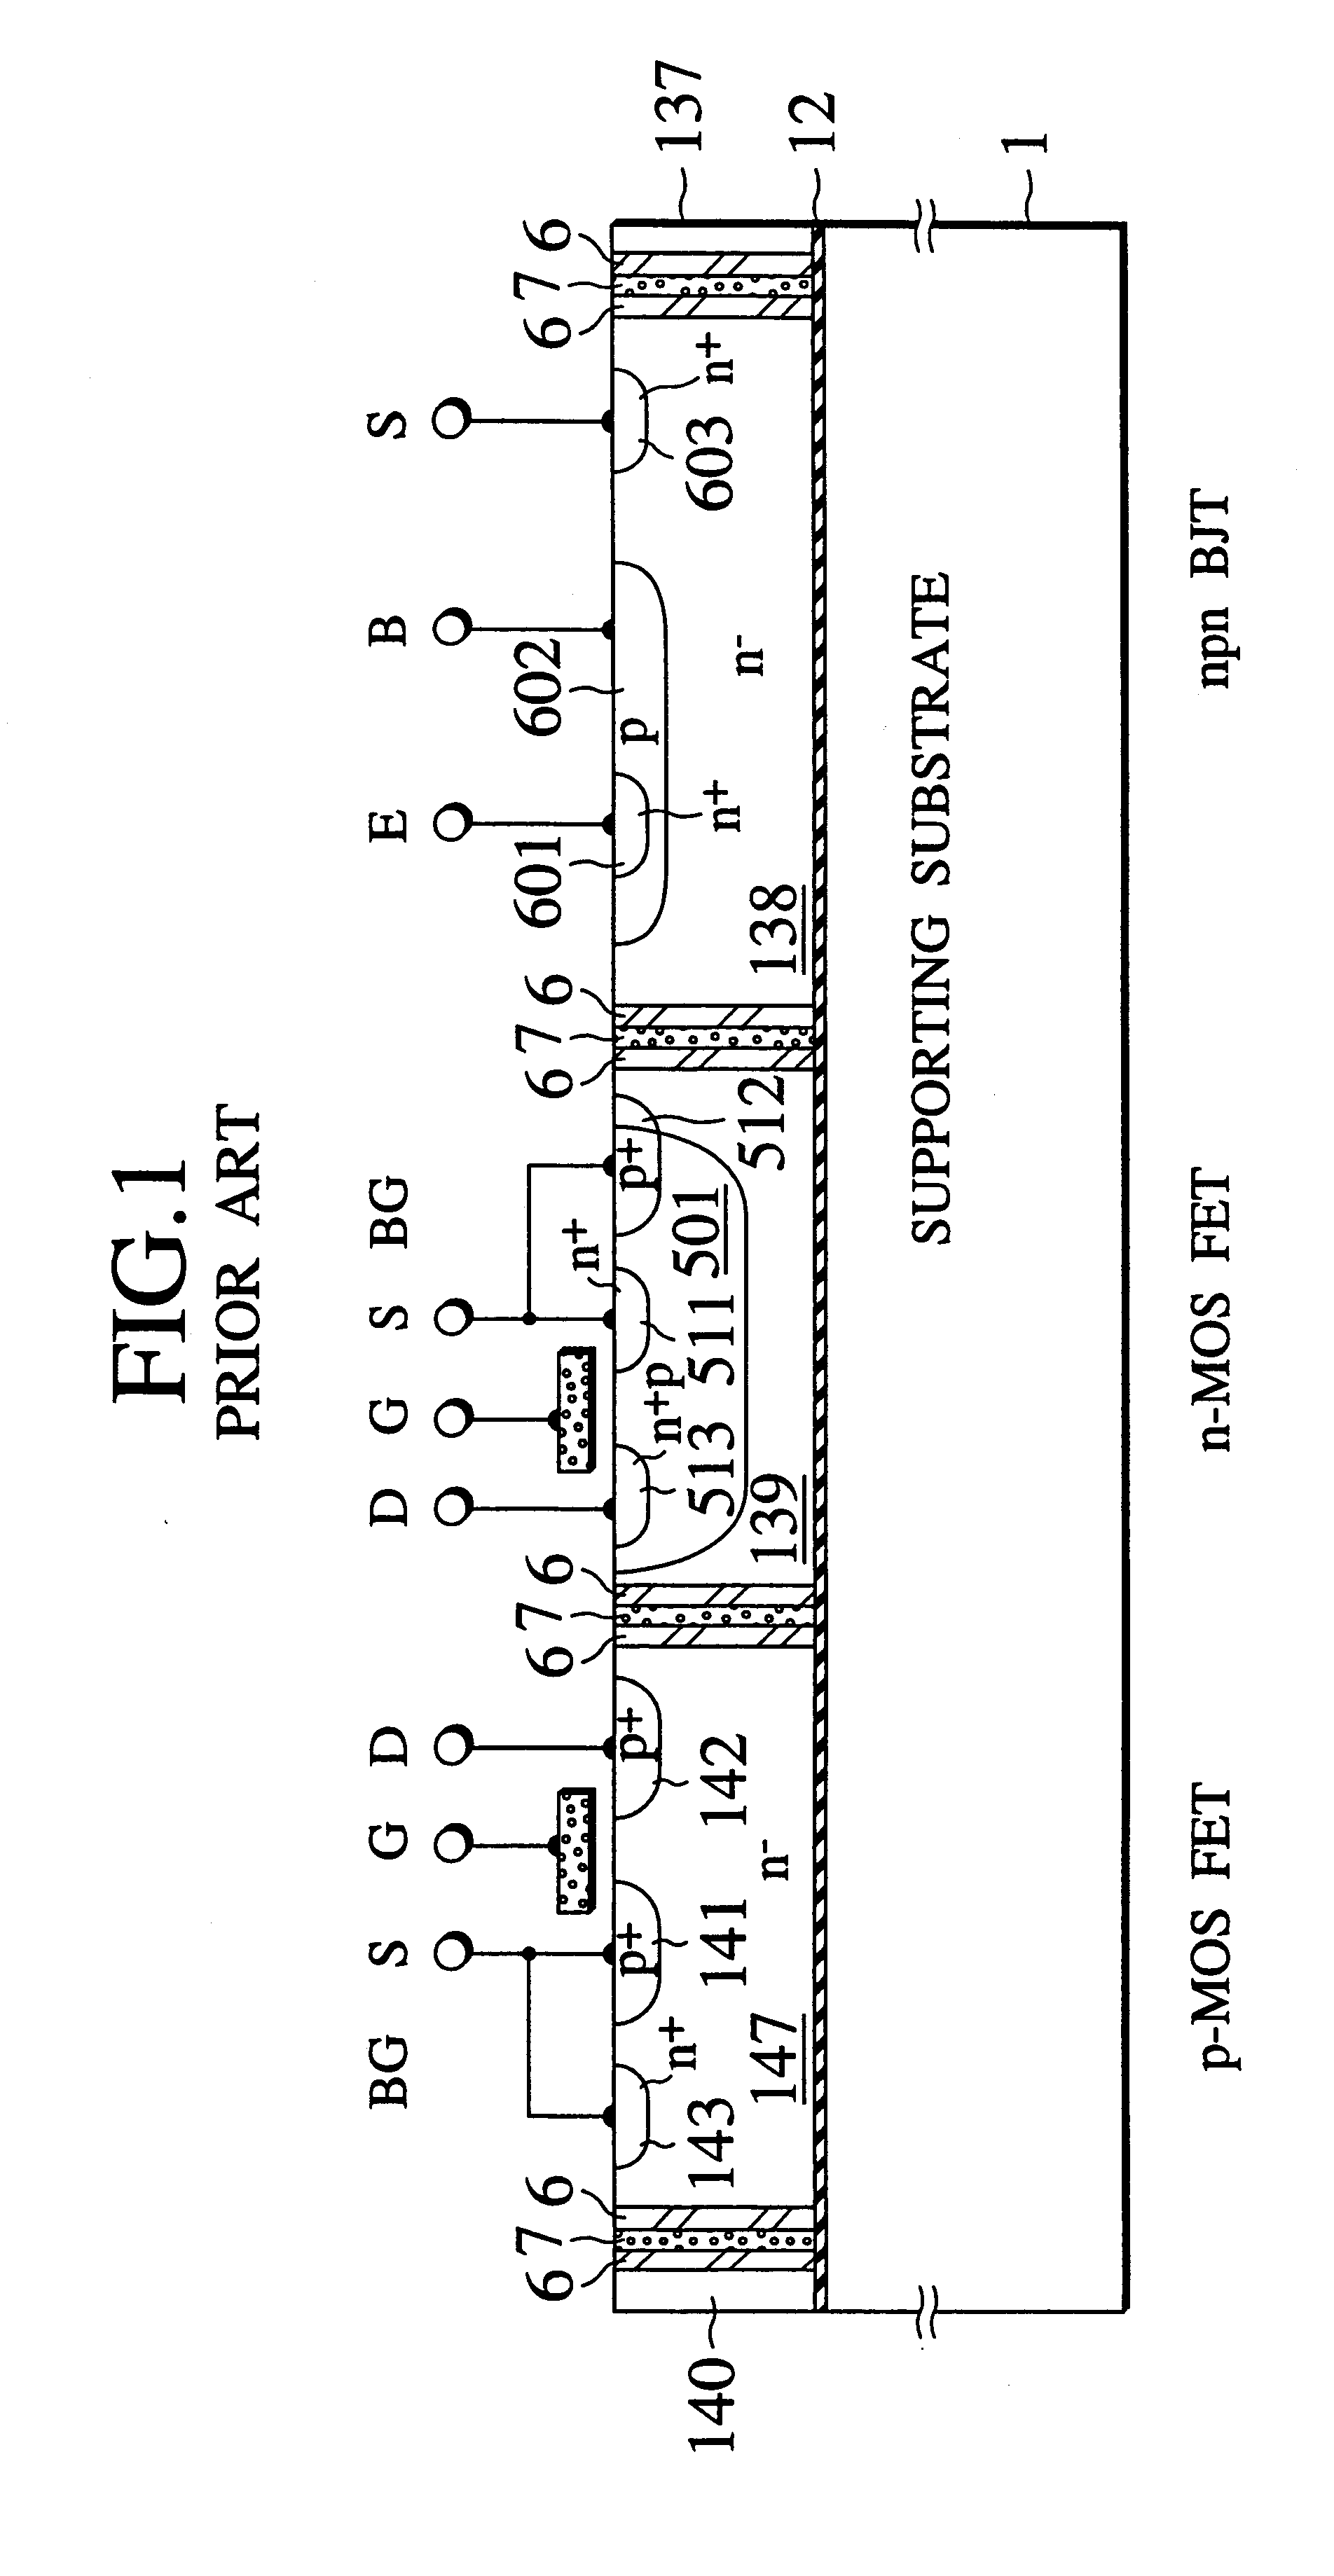 Dielectrically isolated IC driver having upper-side and lower-side arm drivers and power IC having the same